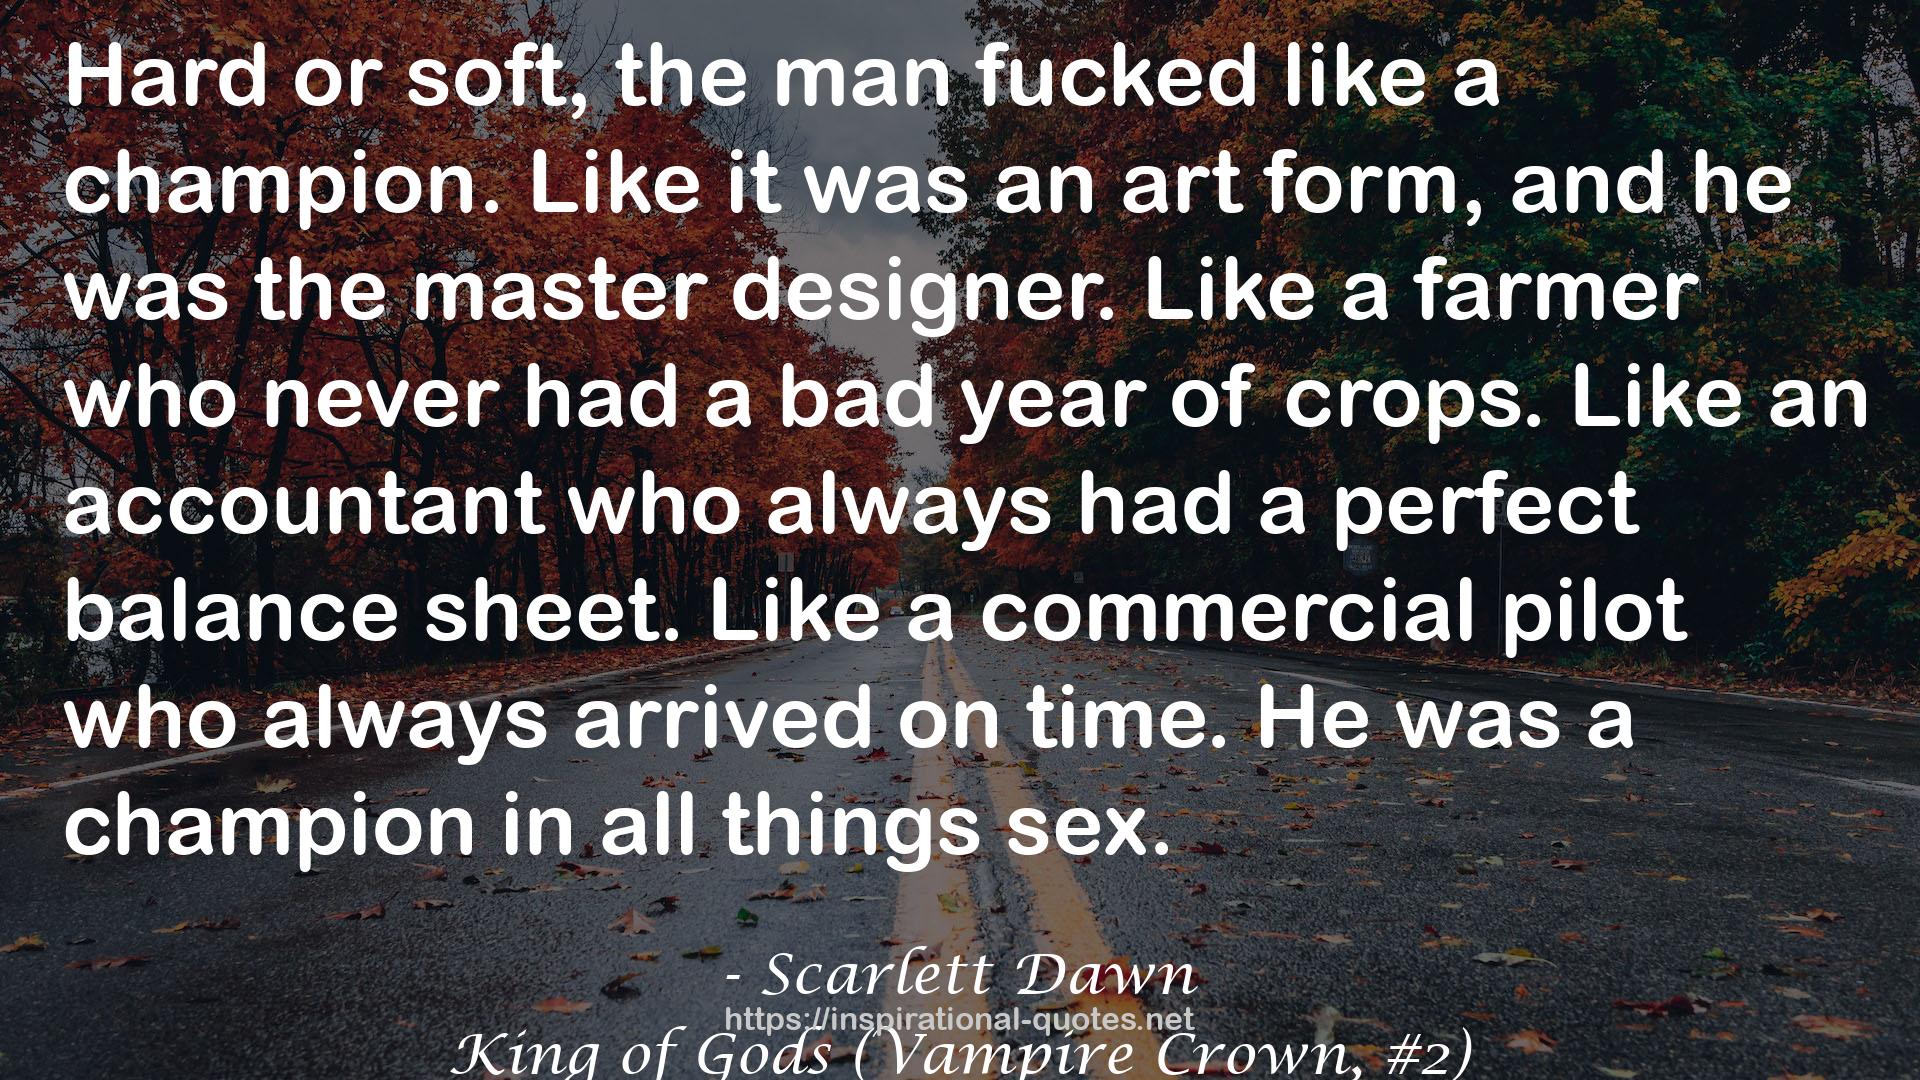 King of Gods (Vampire Crown, #2) QUOTES